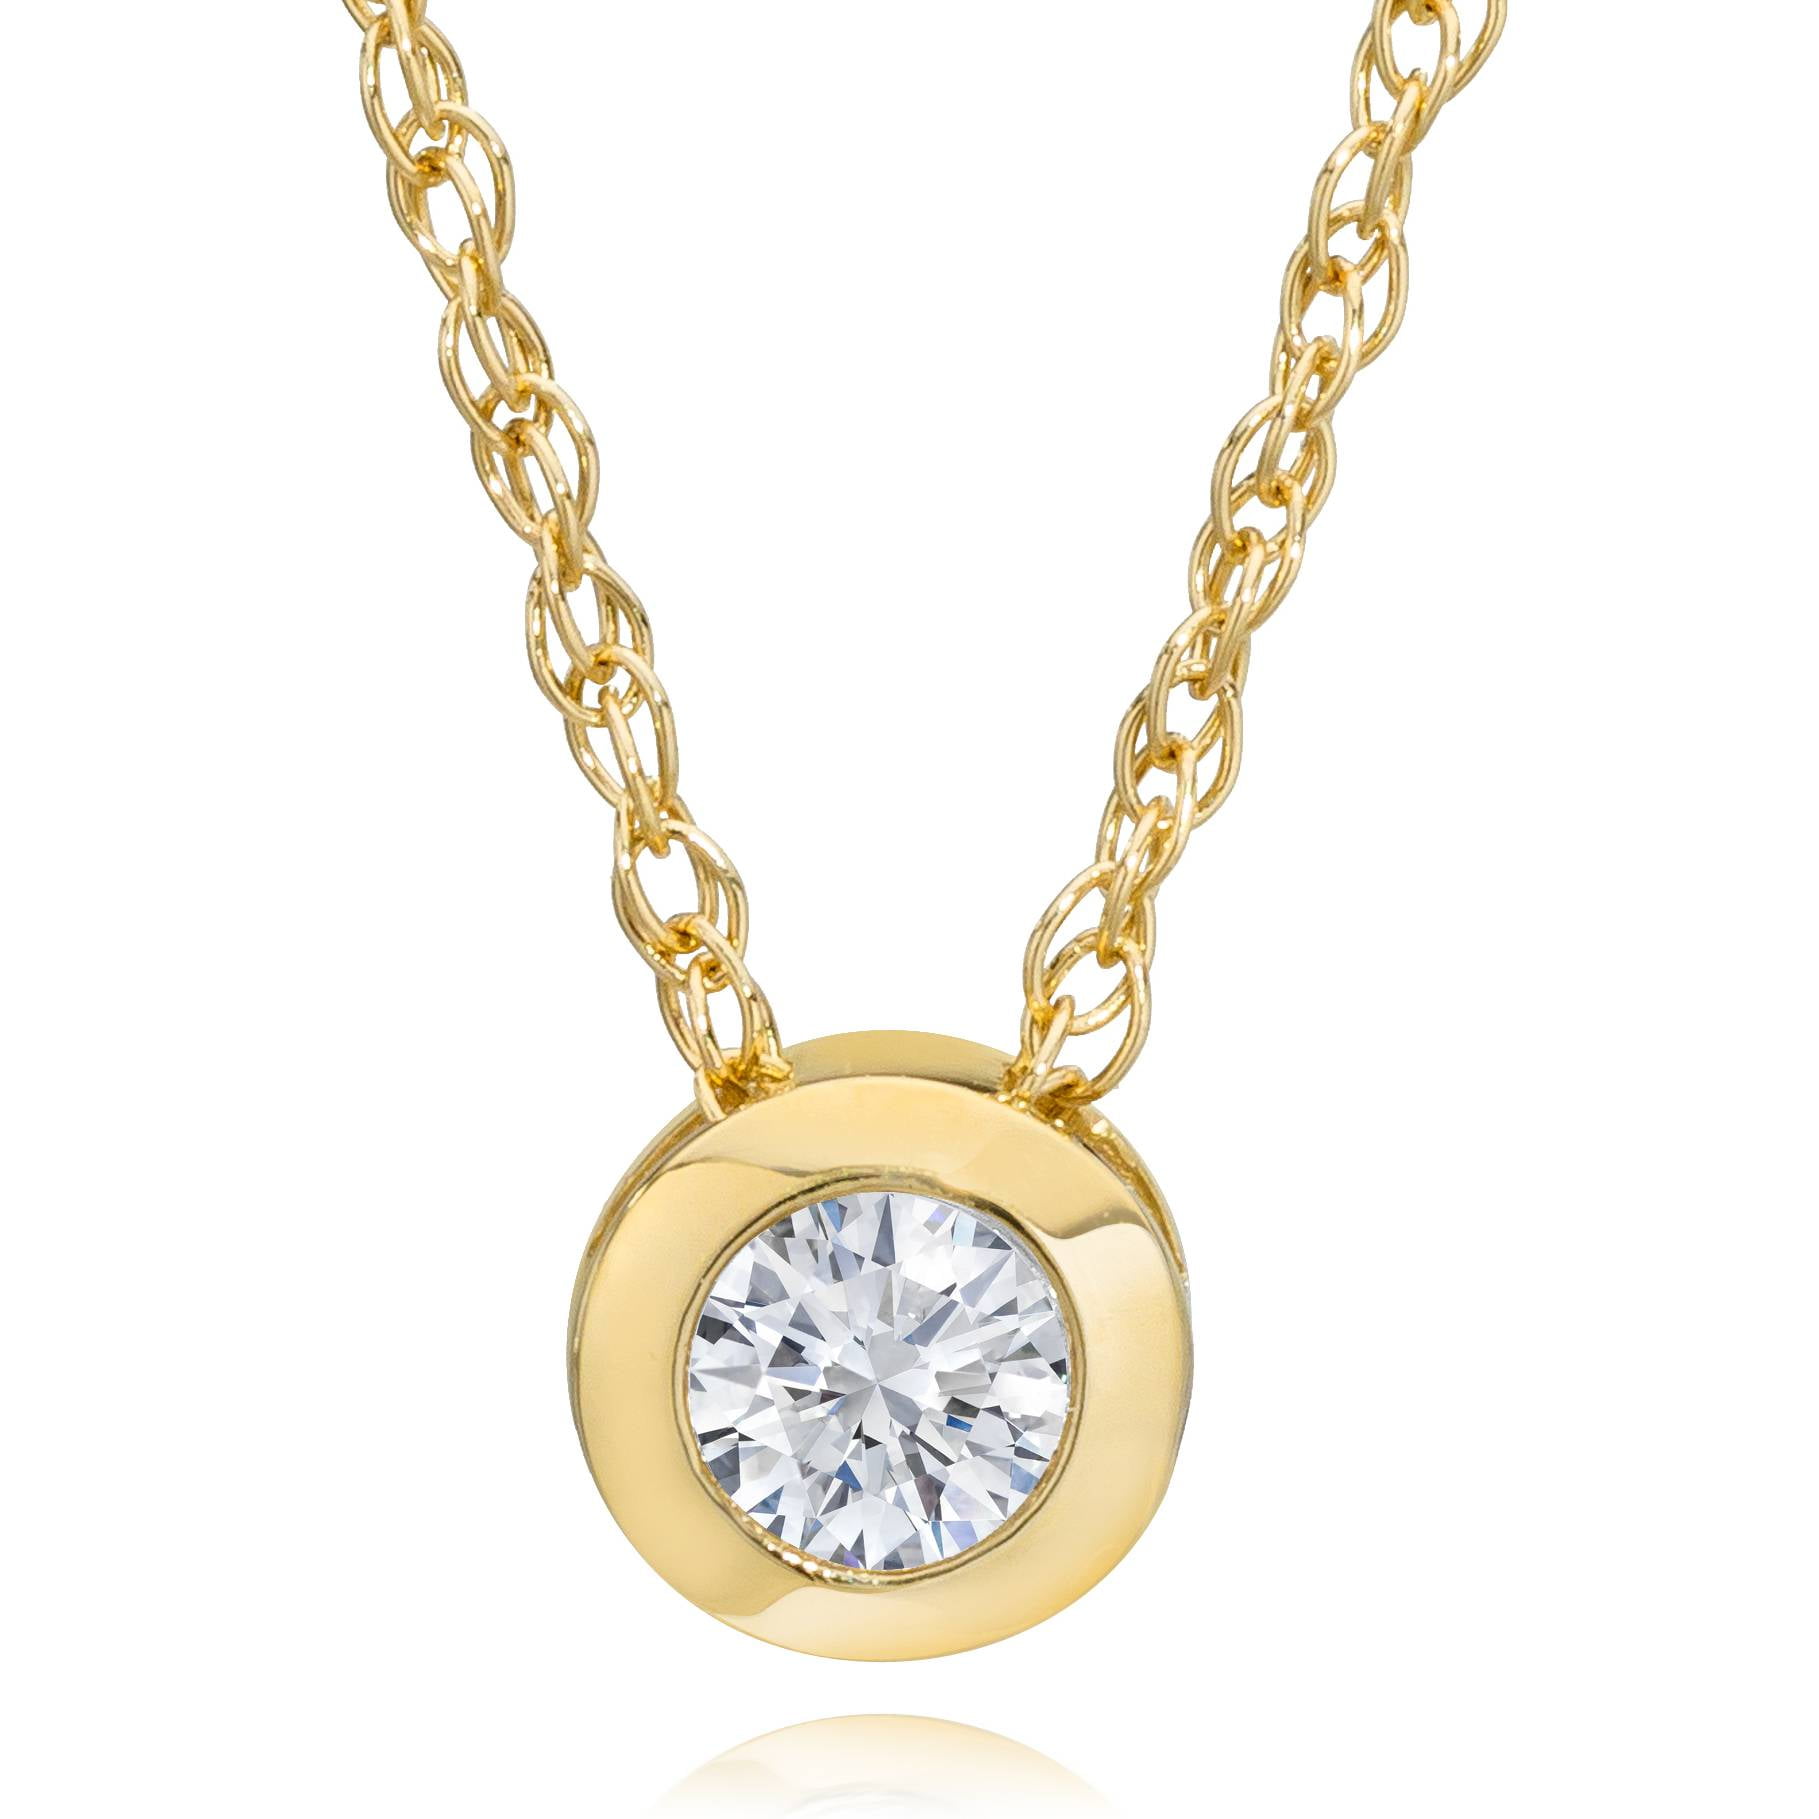 The Kids Collection 14K Two-Tone Gold Bezel-Set Solitaire Round Diamond Kid Girl Charm Pendant